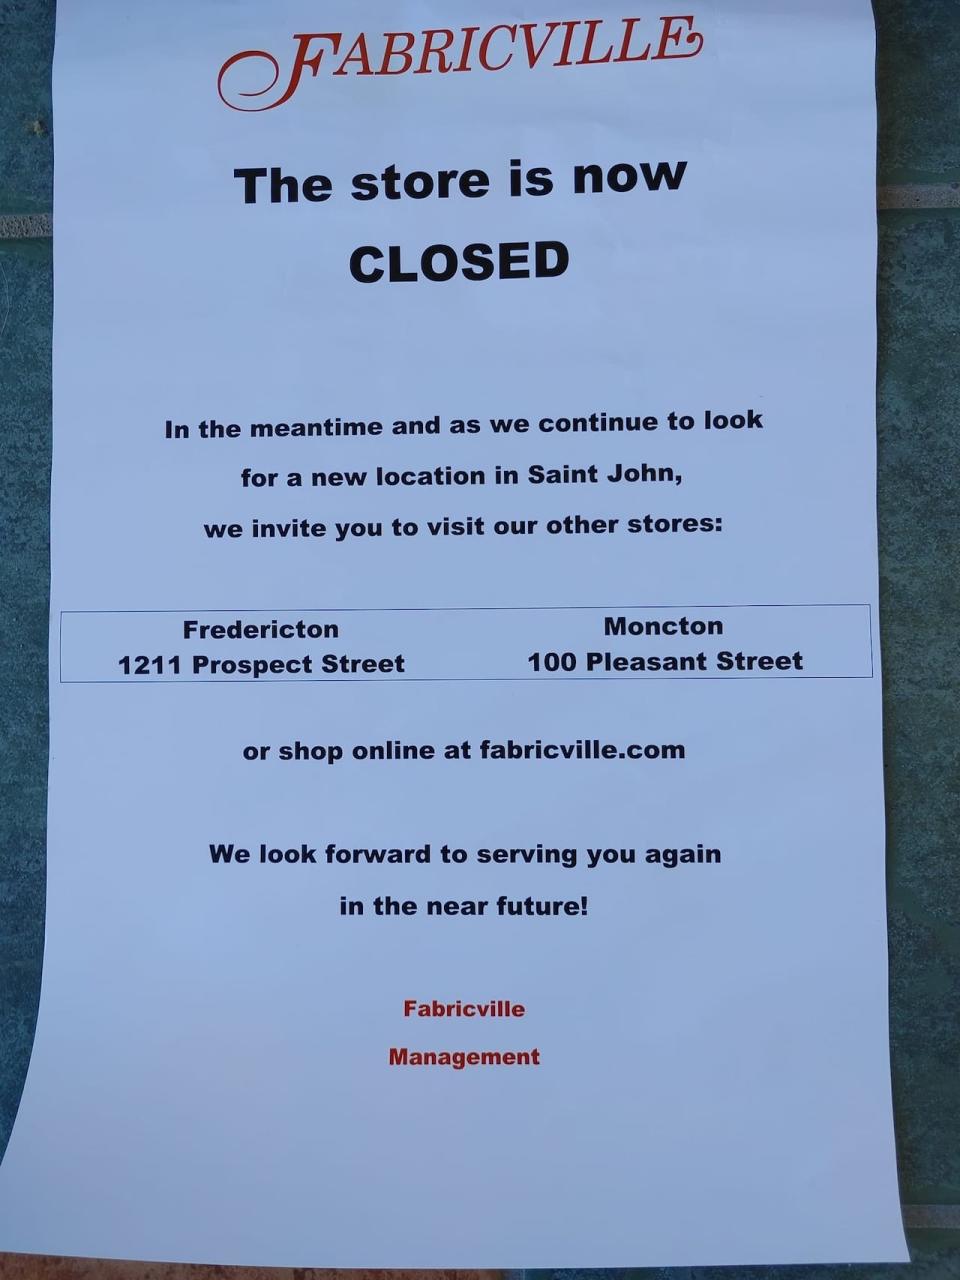 In September, Fabricville #82 Saint John posted on its Facebook page showing a notice that said the store would be closed while the company continued to look for a new location in Saint John.